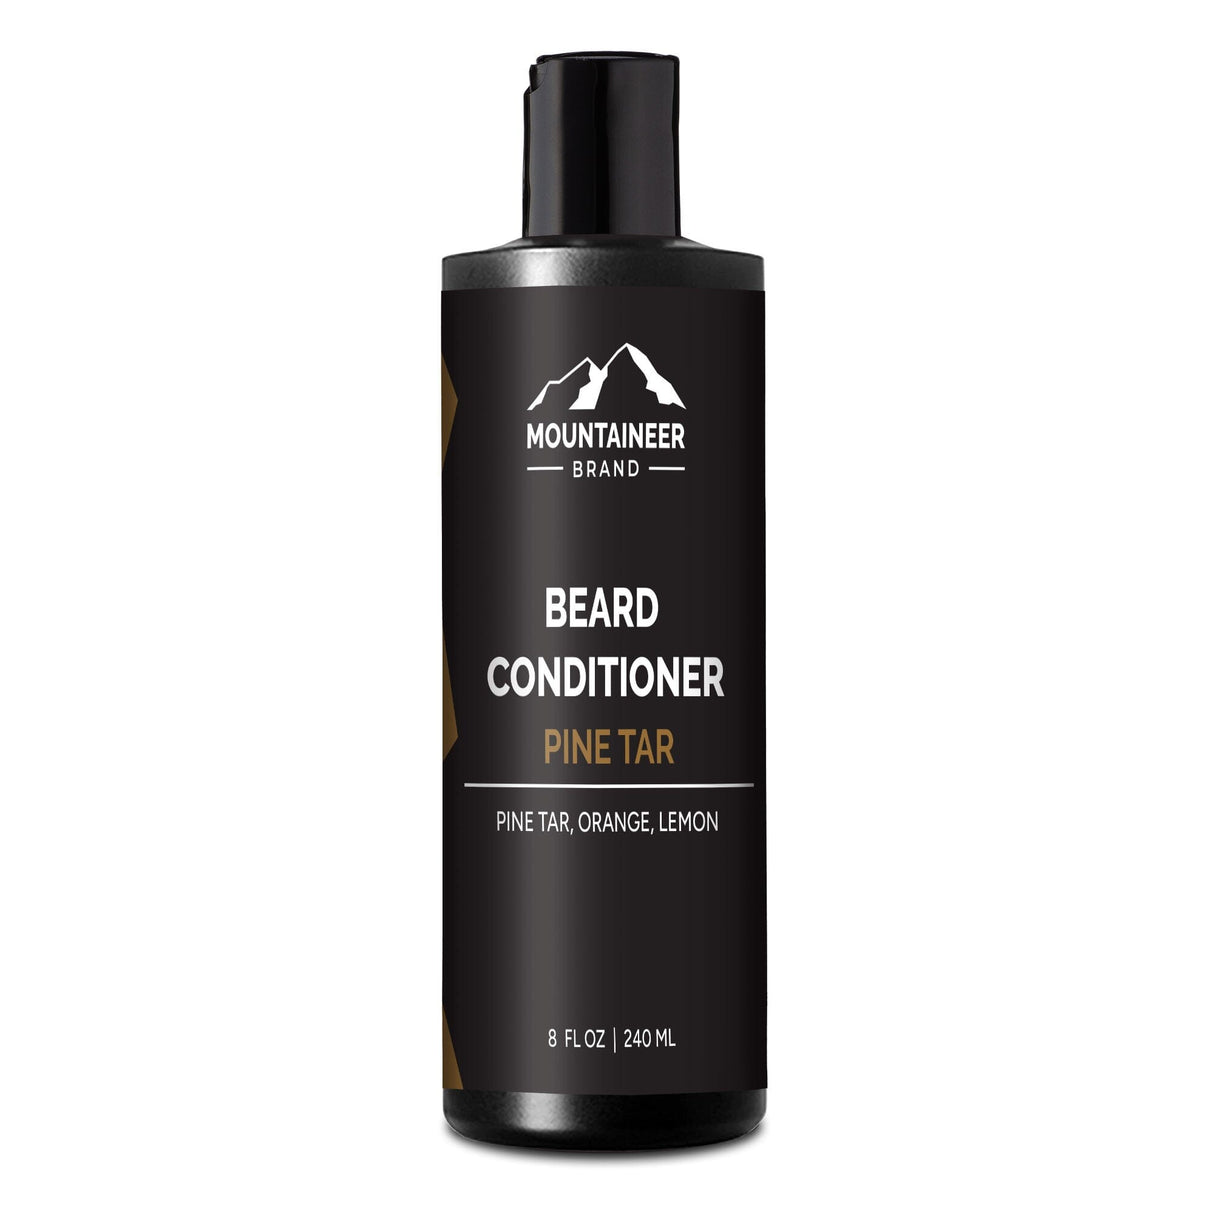 A bottle of Mountaineer Brand Products Pine Tar Beard Conditioner with natural ingredients on a white background.